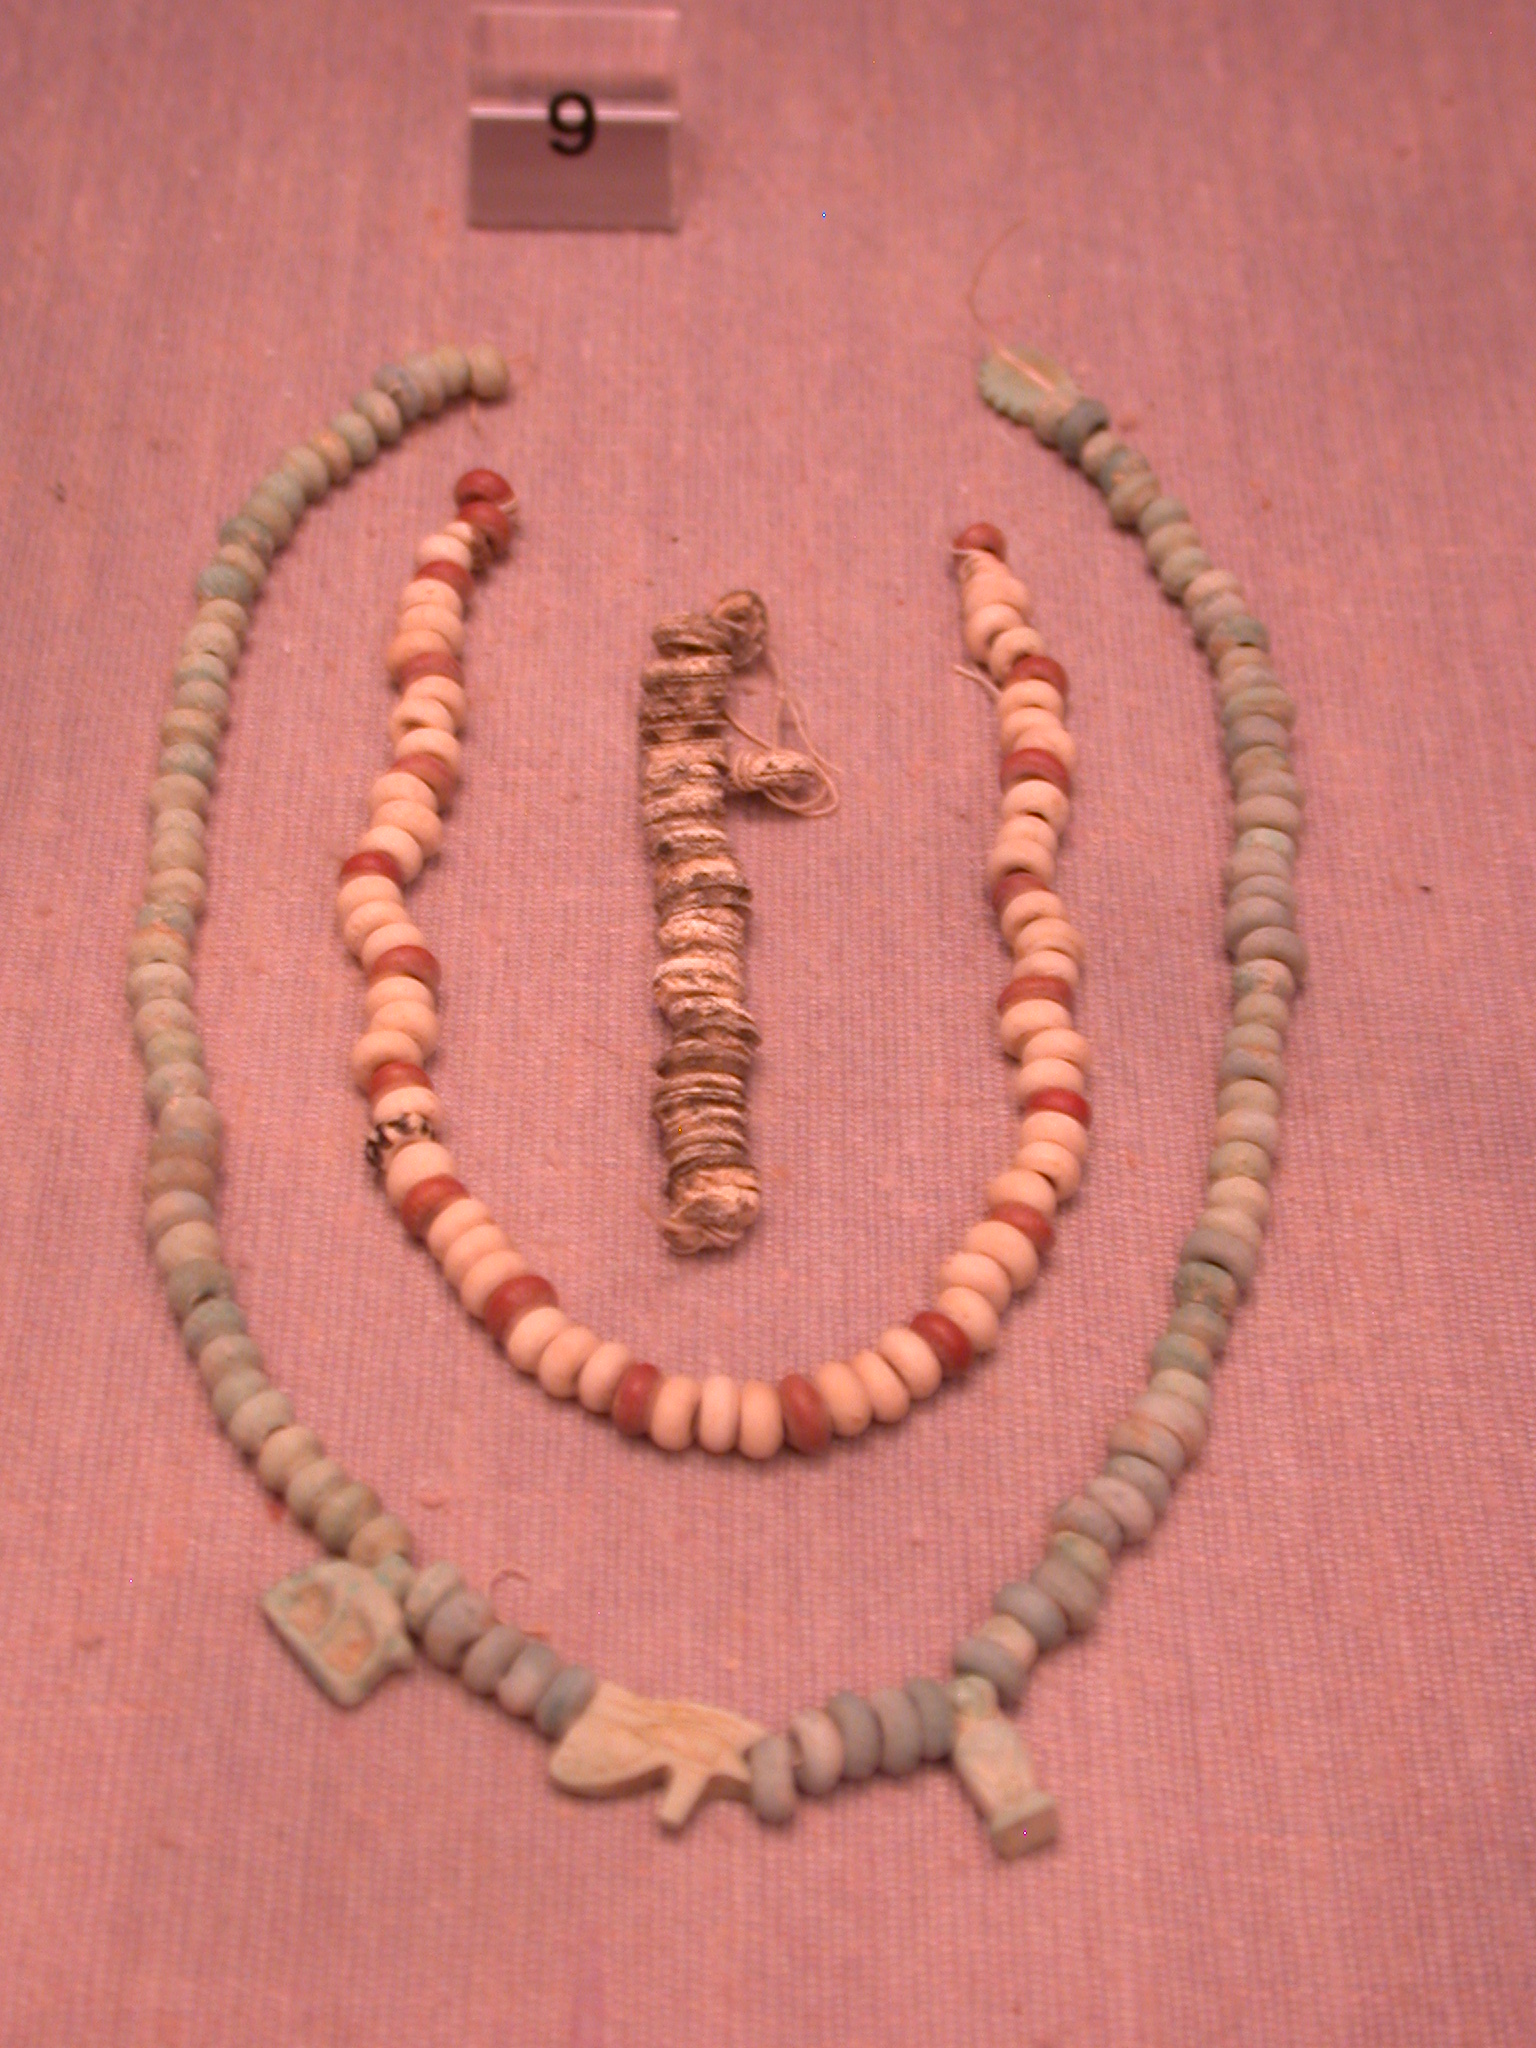 Faience and Steatite Necklaces With Traditional Egyptian Amulets, Sanam, 25th Dynasty Sudan, Fitzwilliam Museum, Cambridge, England